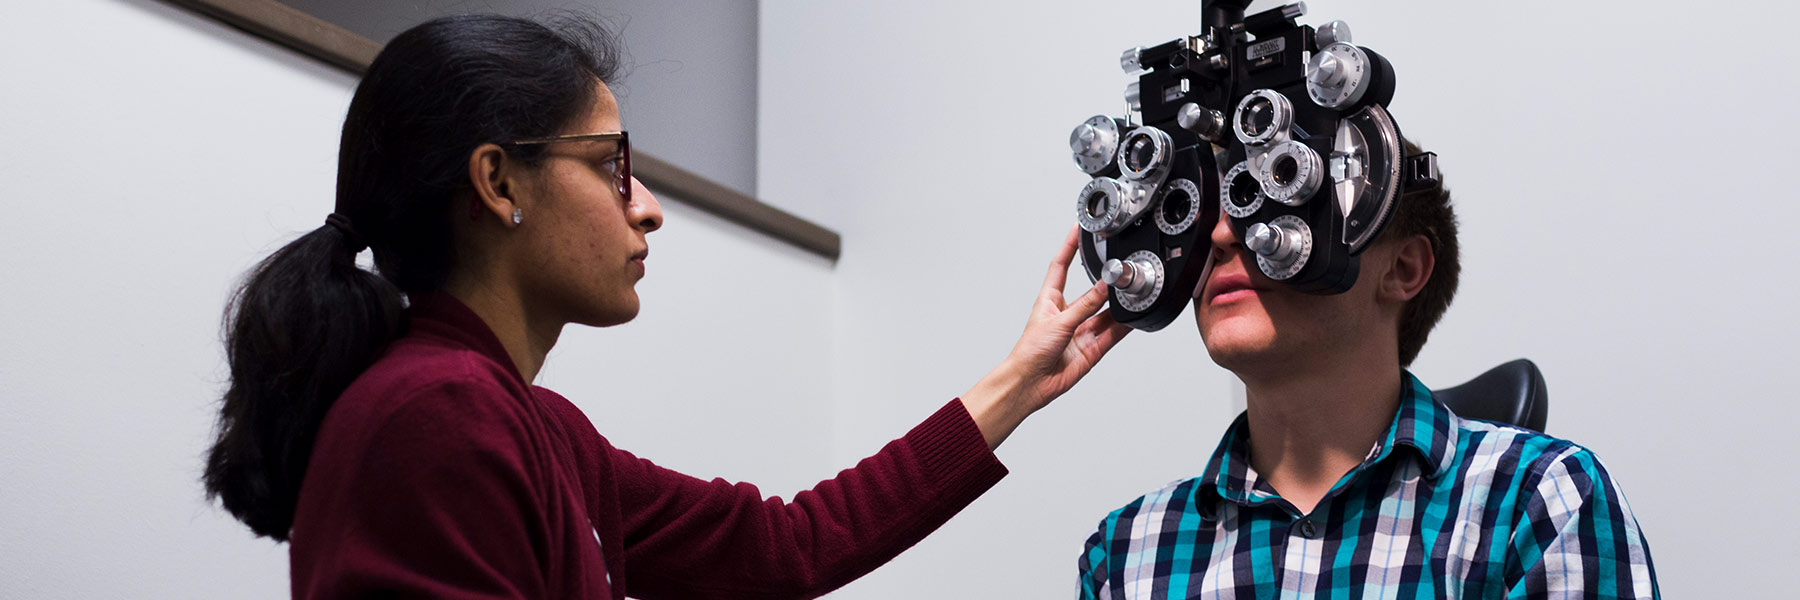 An optometrist student positions equipment in front of a patient's eyes